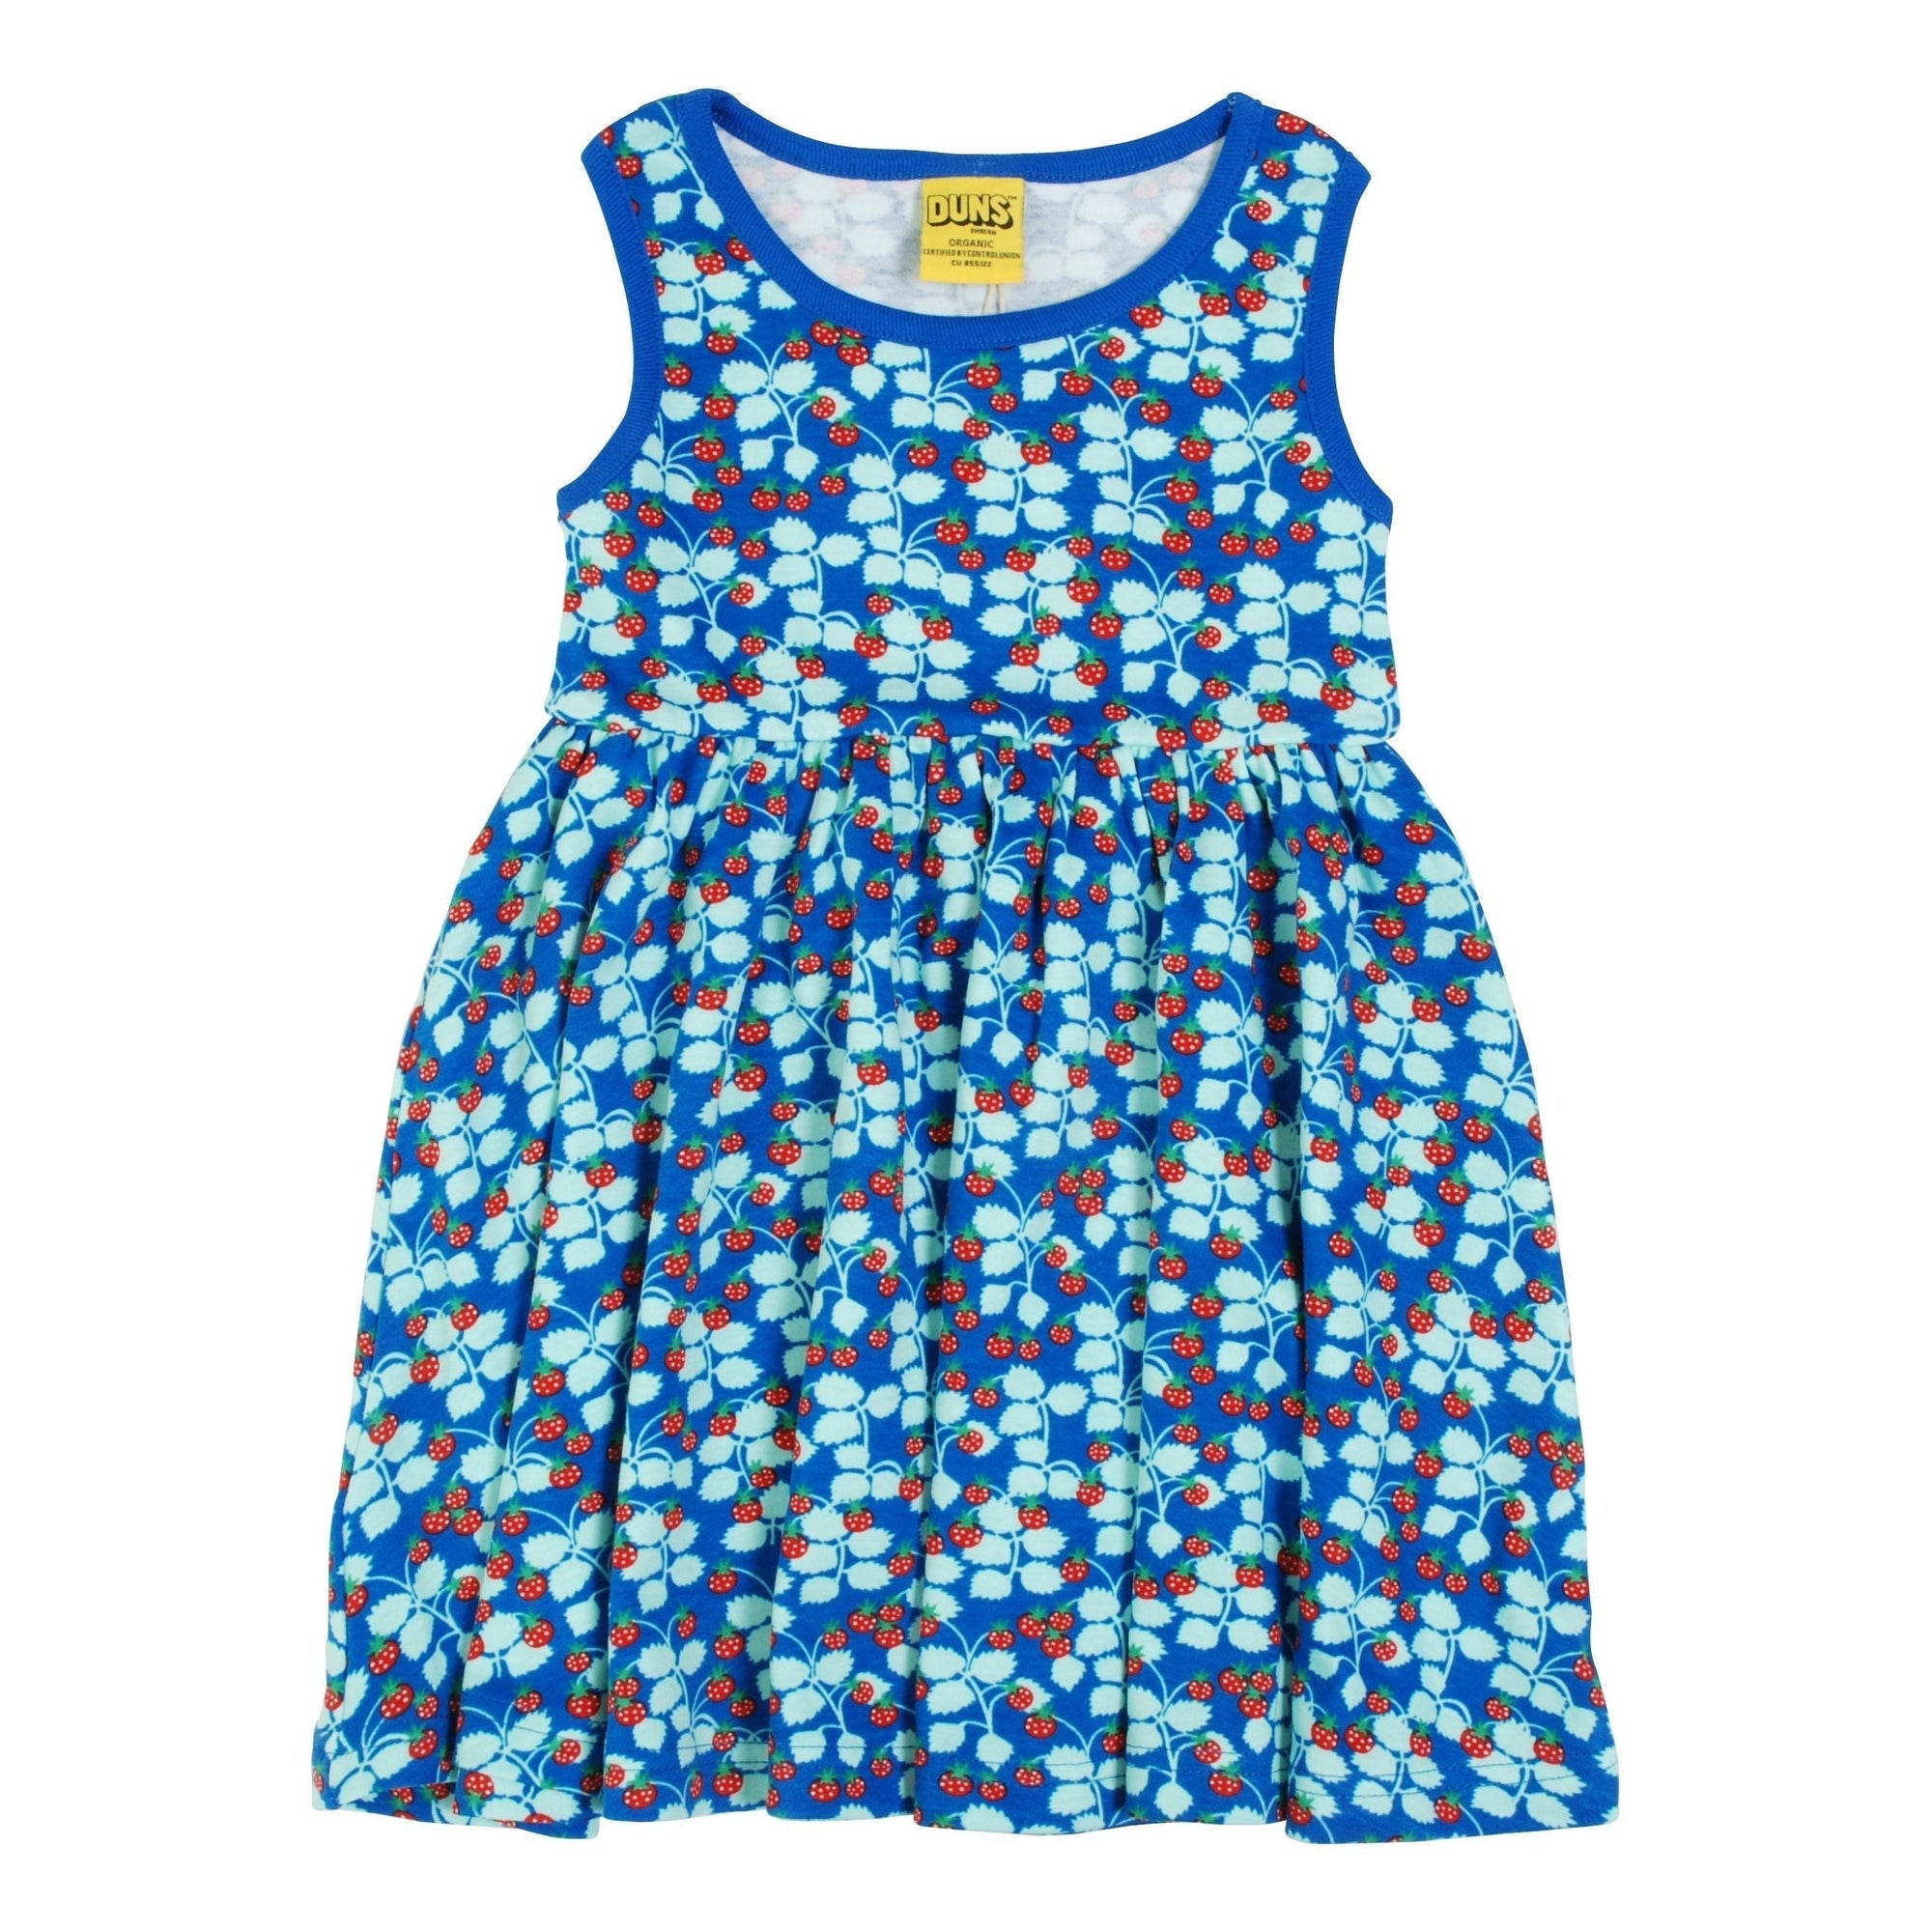 Strawberry - Blue Sleeveless Dress With Gathered Skirt - 2 Left Size 9-10 & 12-13 years-Duns Sweden-Modern Rascals